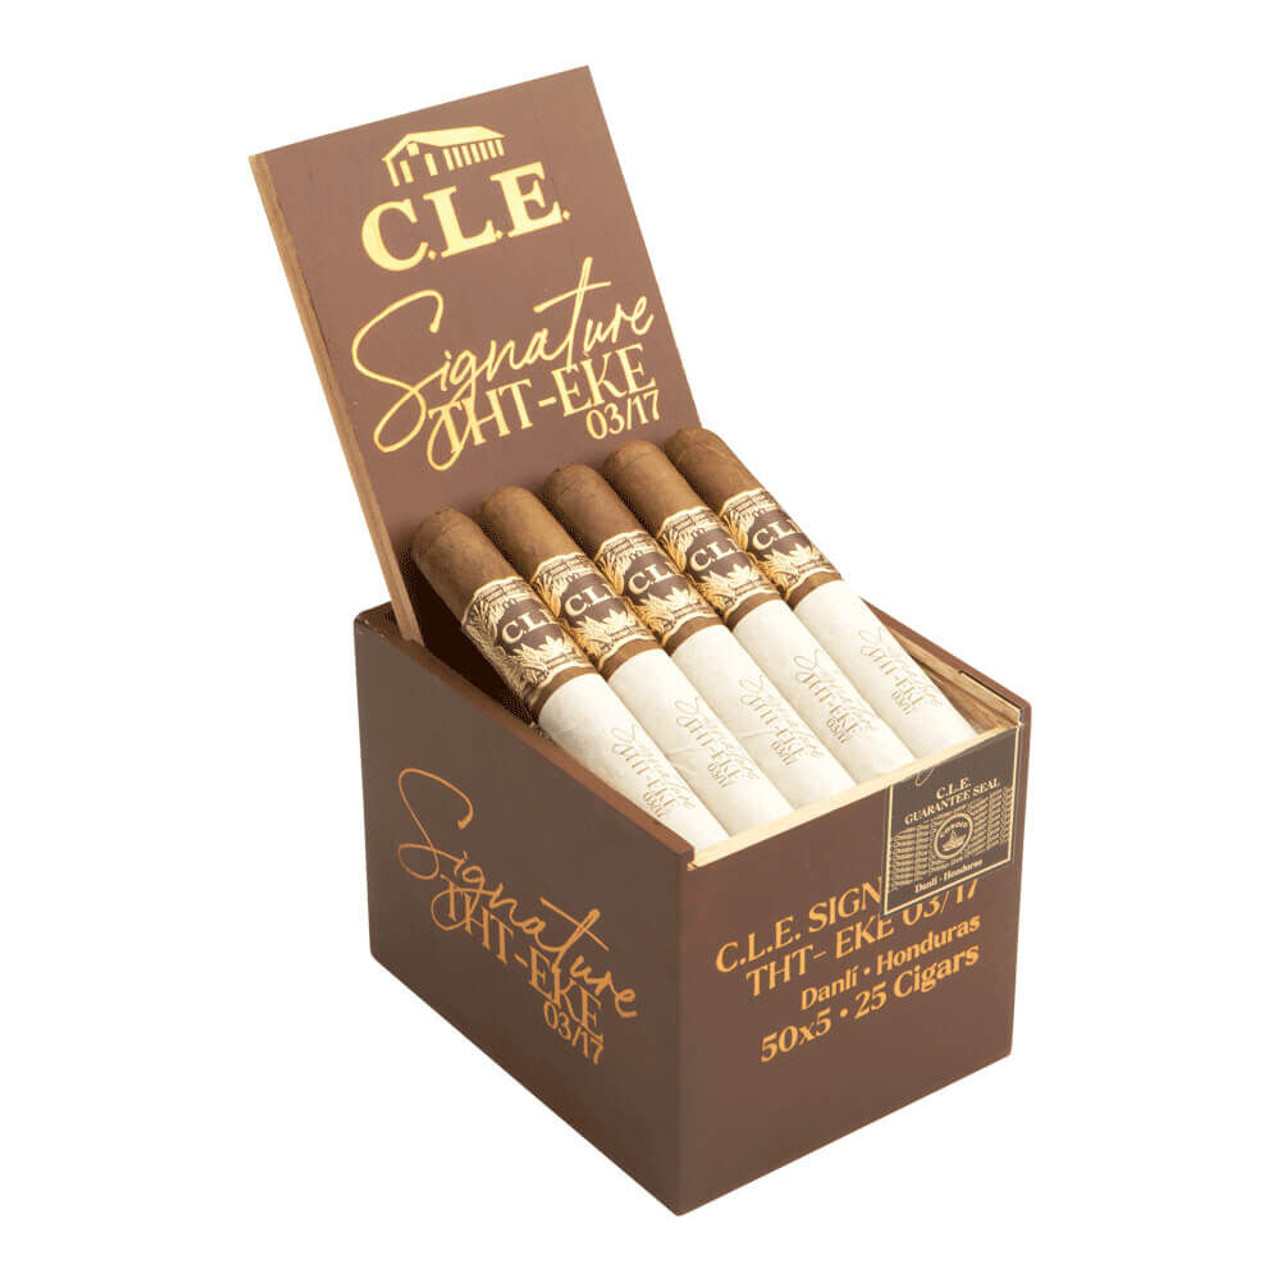 CLE Signature Cameroon 50x5 Cigars - 5 x 50 (Box of 25) Open